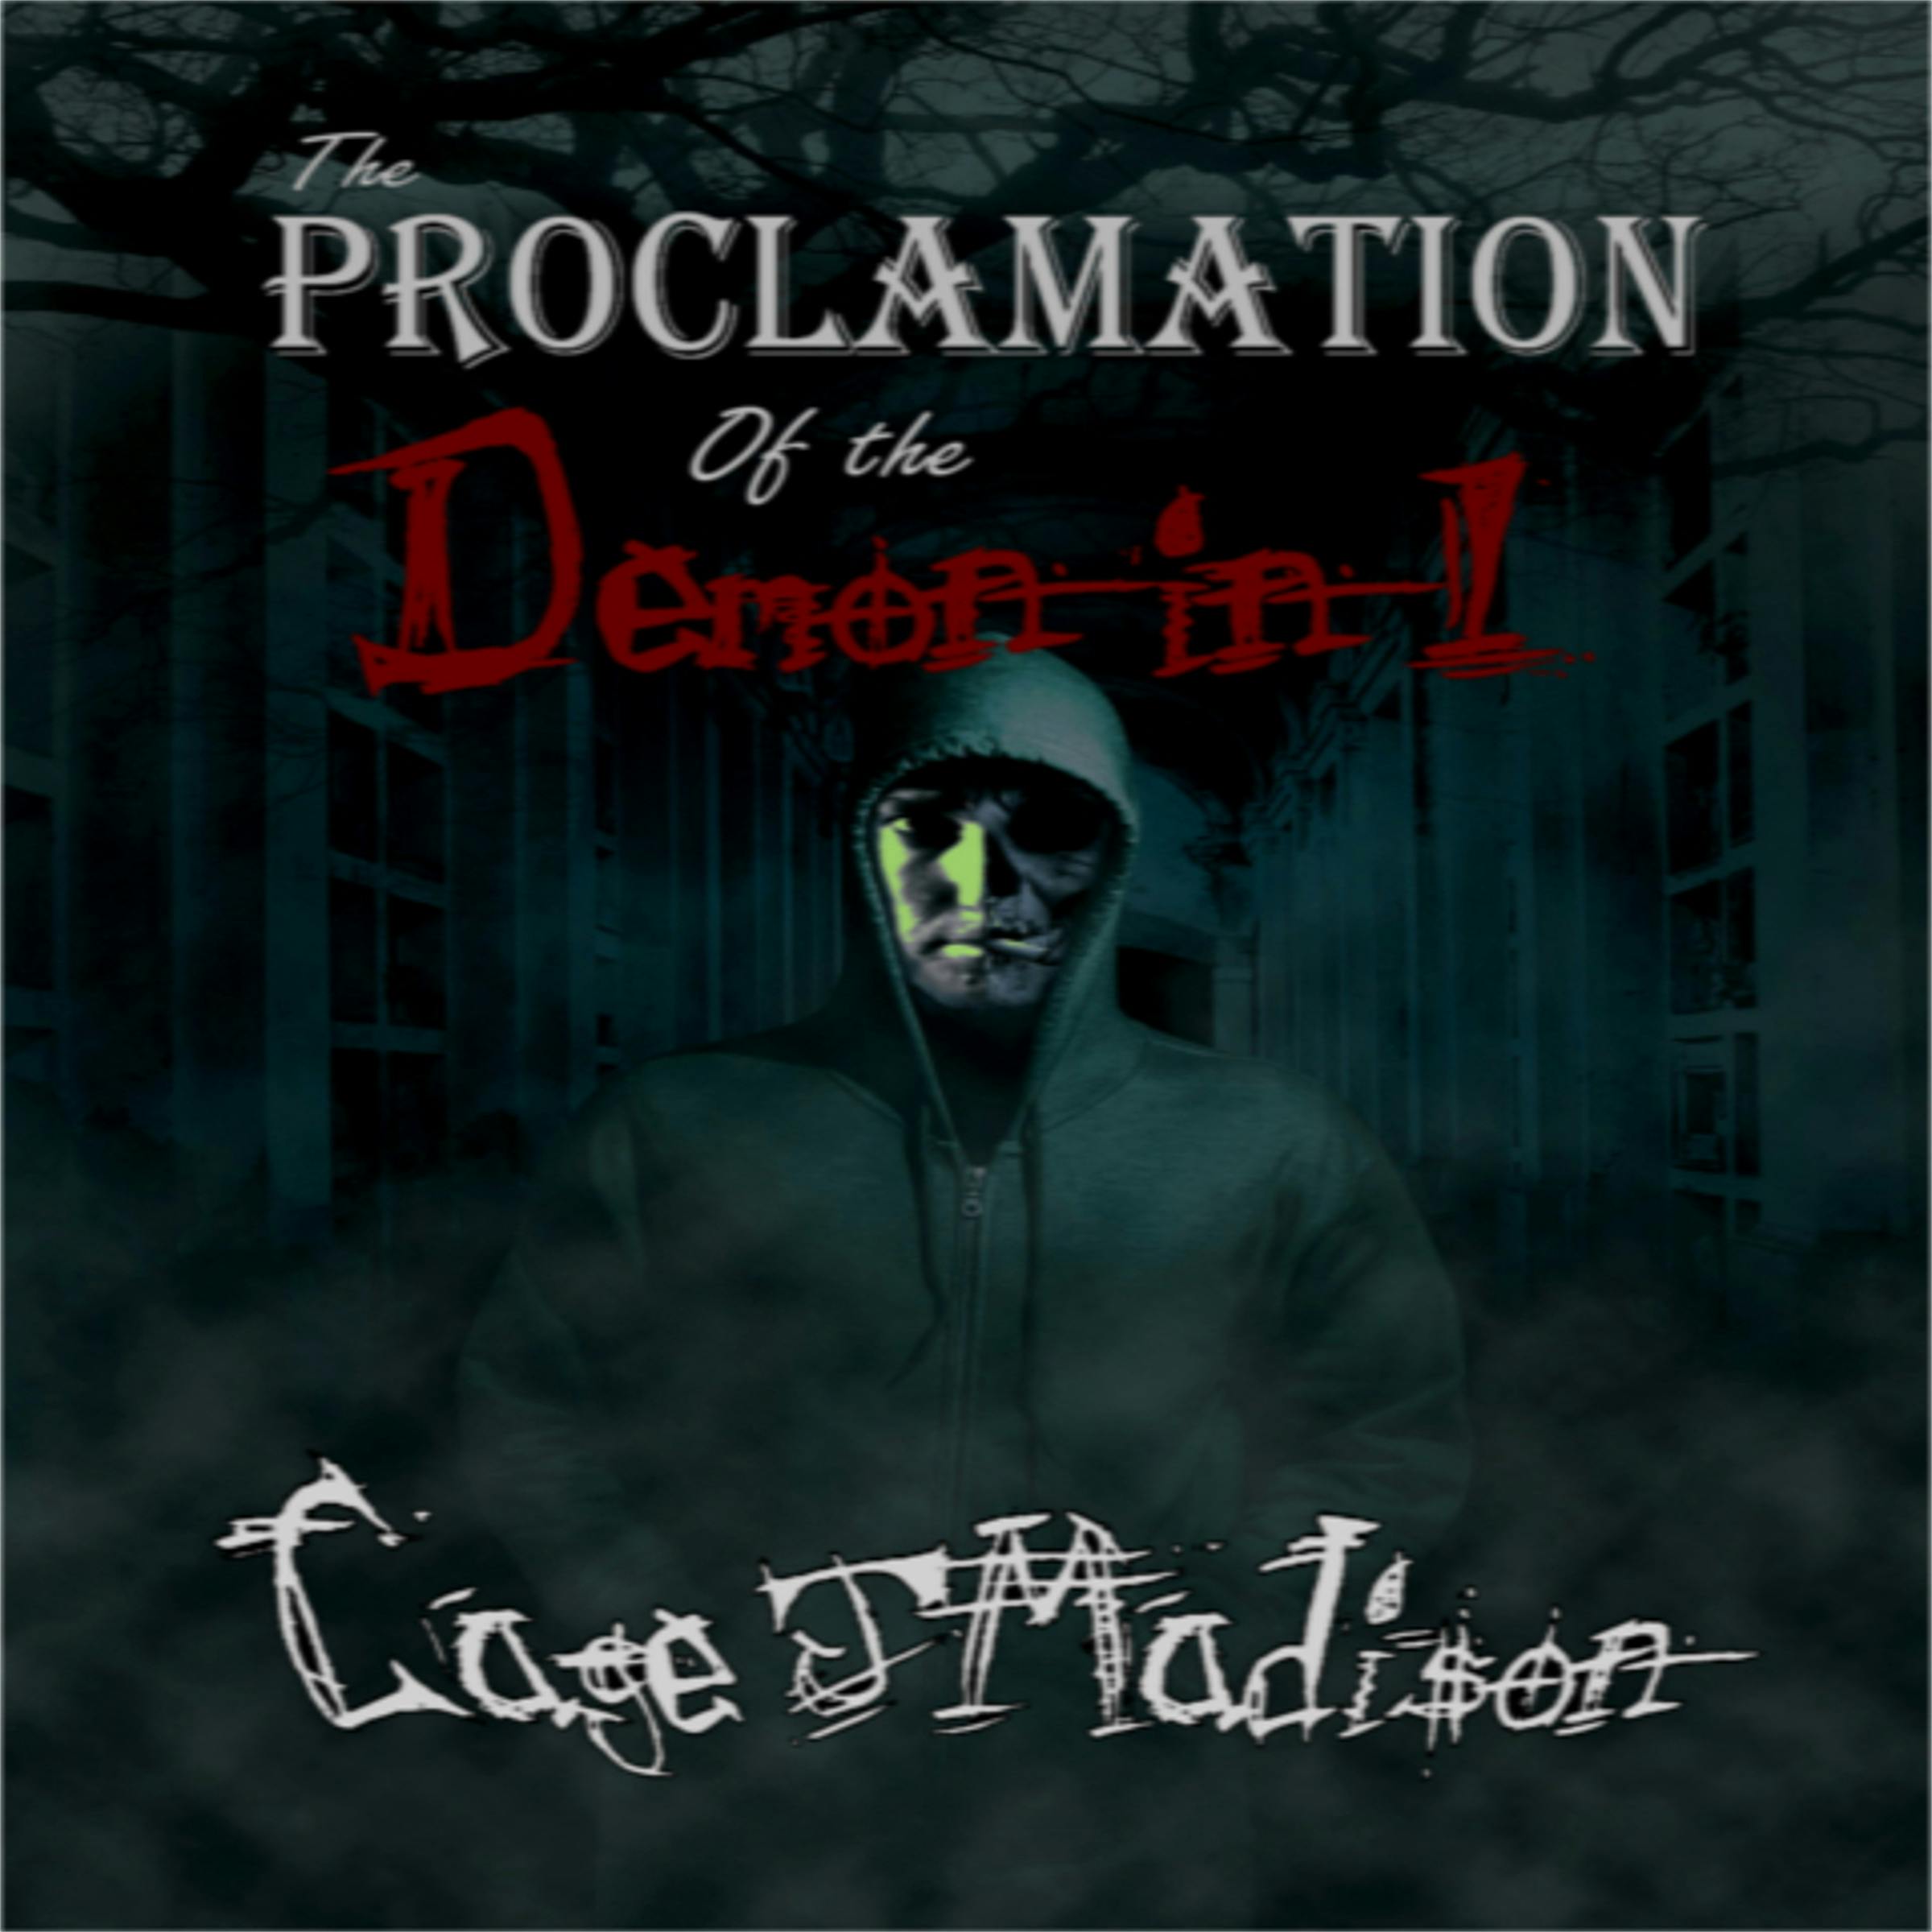 The Proclamation of the Demon in I - Cage J Madison